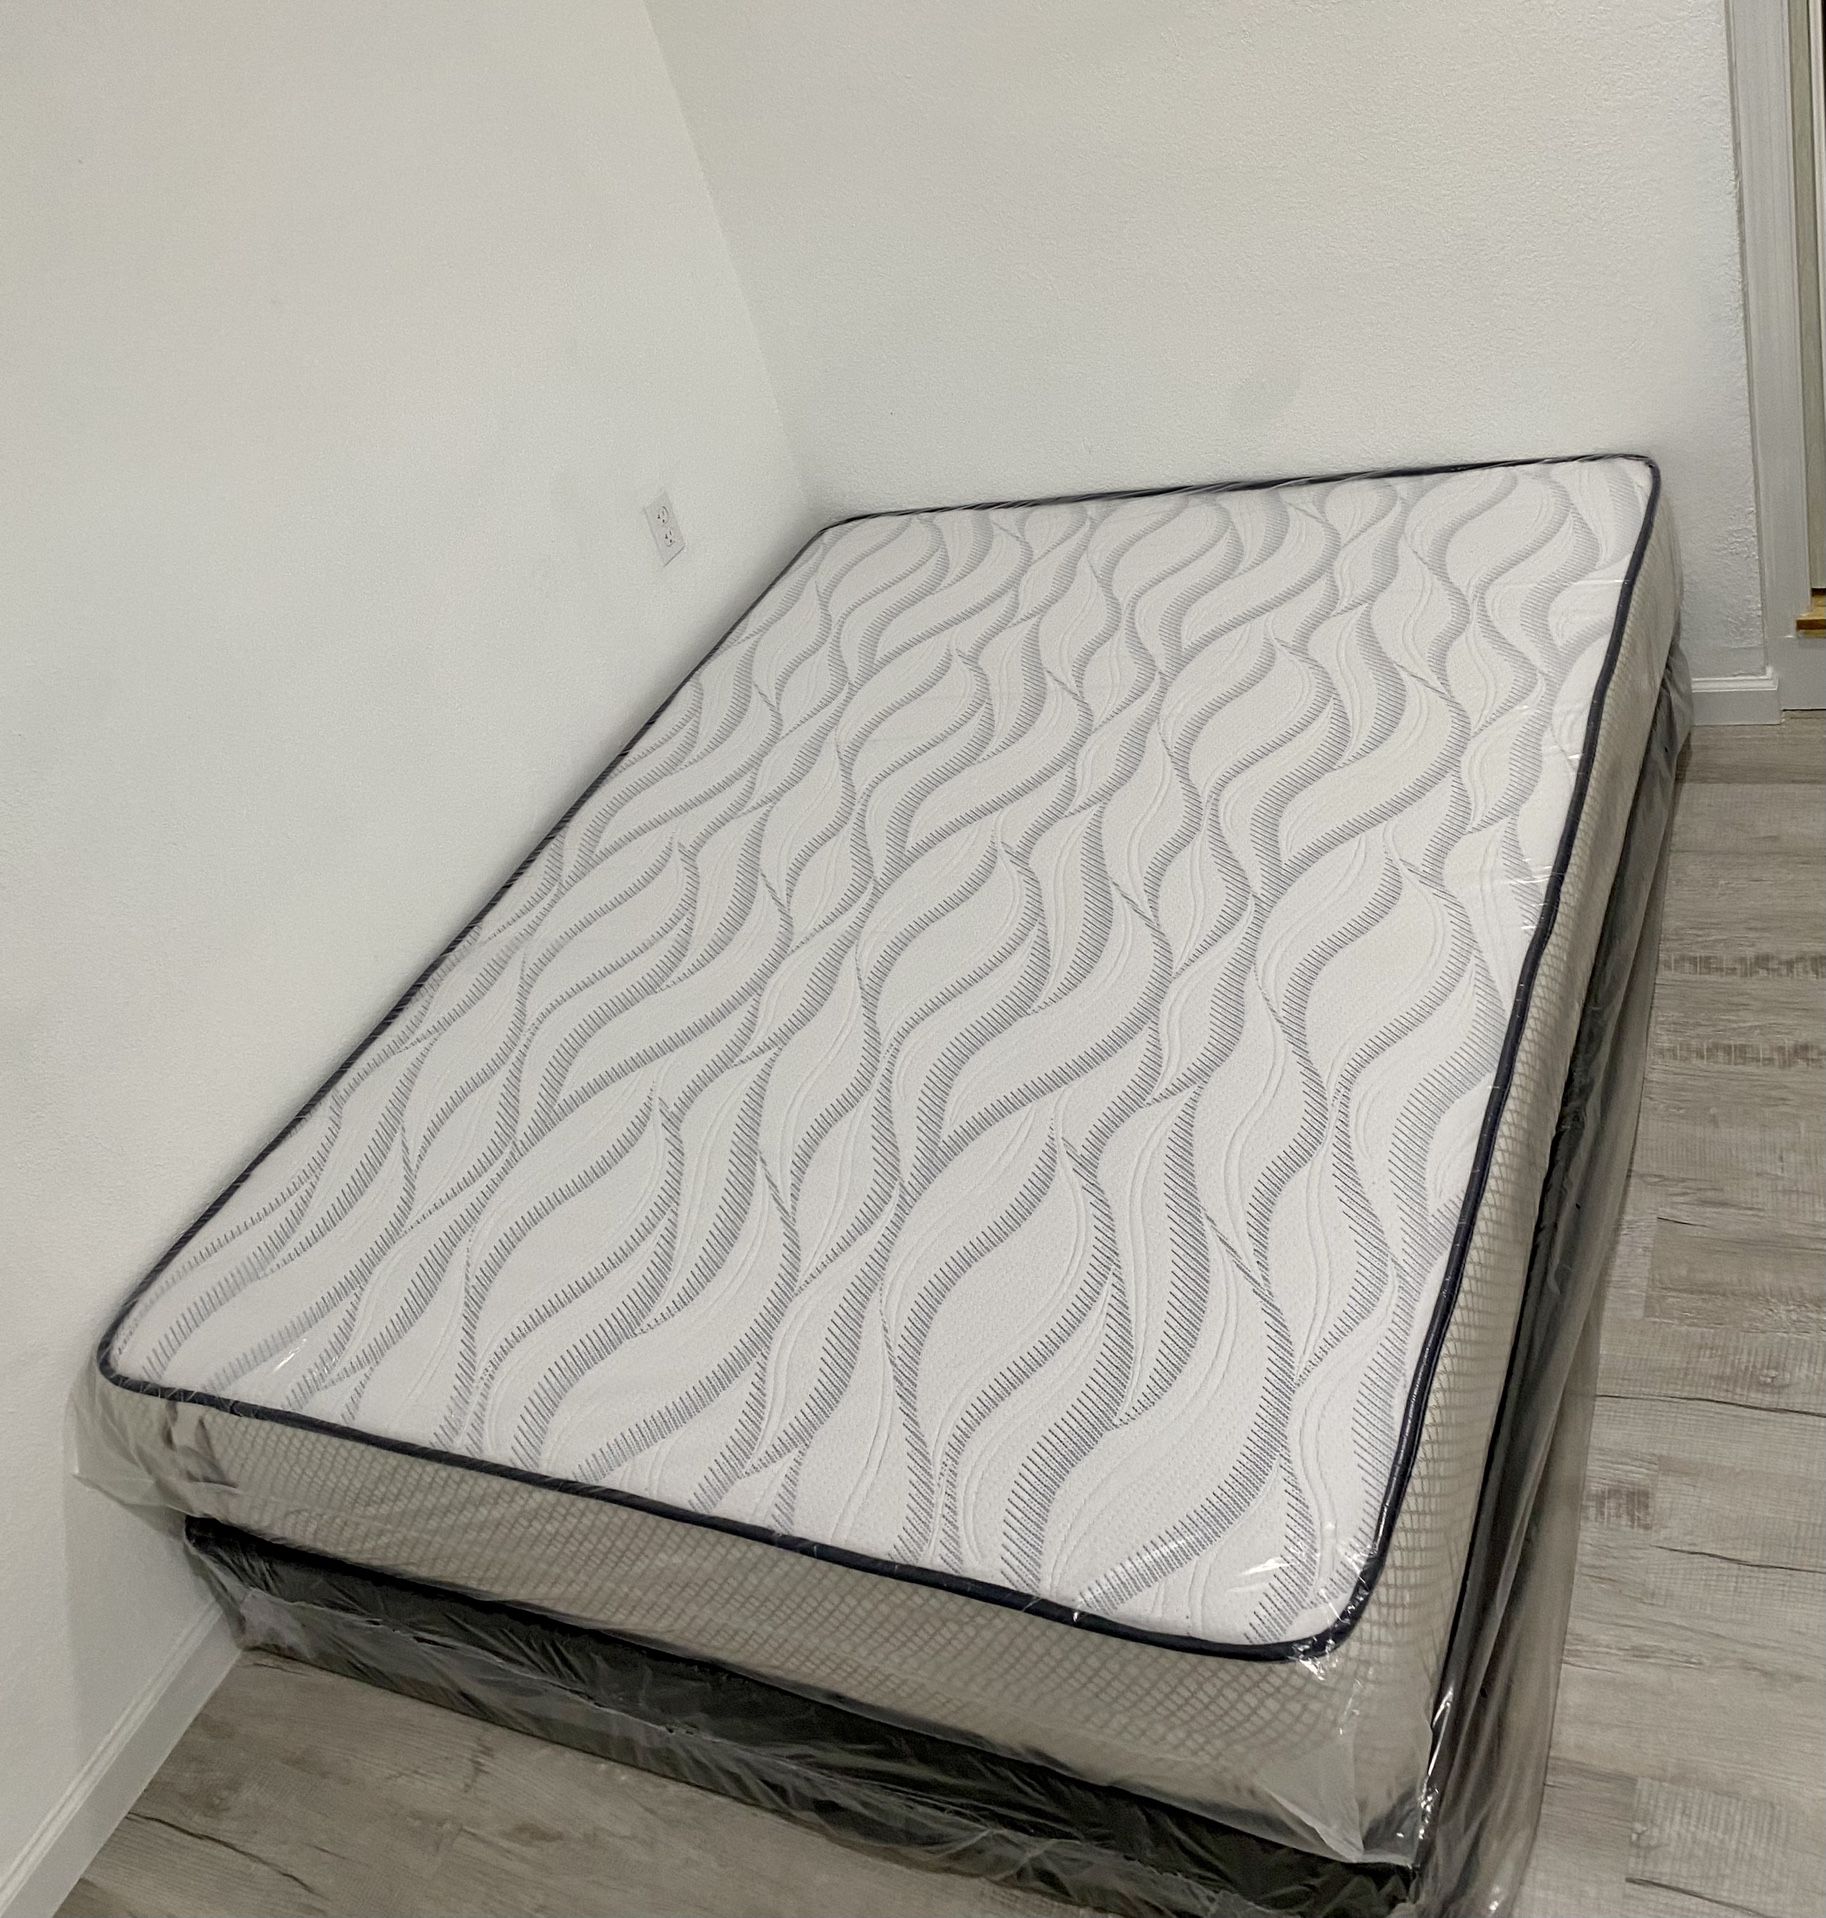 Full Size Mattress 10 Inches Thick With Box Springs Also Available in: Twin-Queen-King New From Factory Same Day Delivery